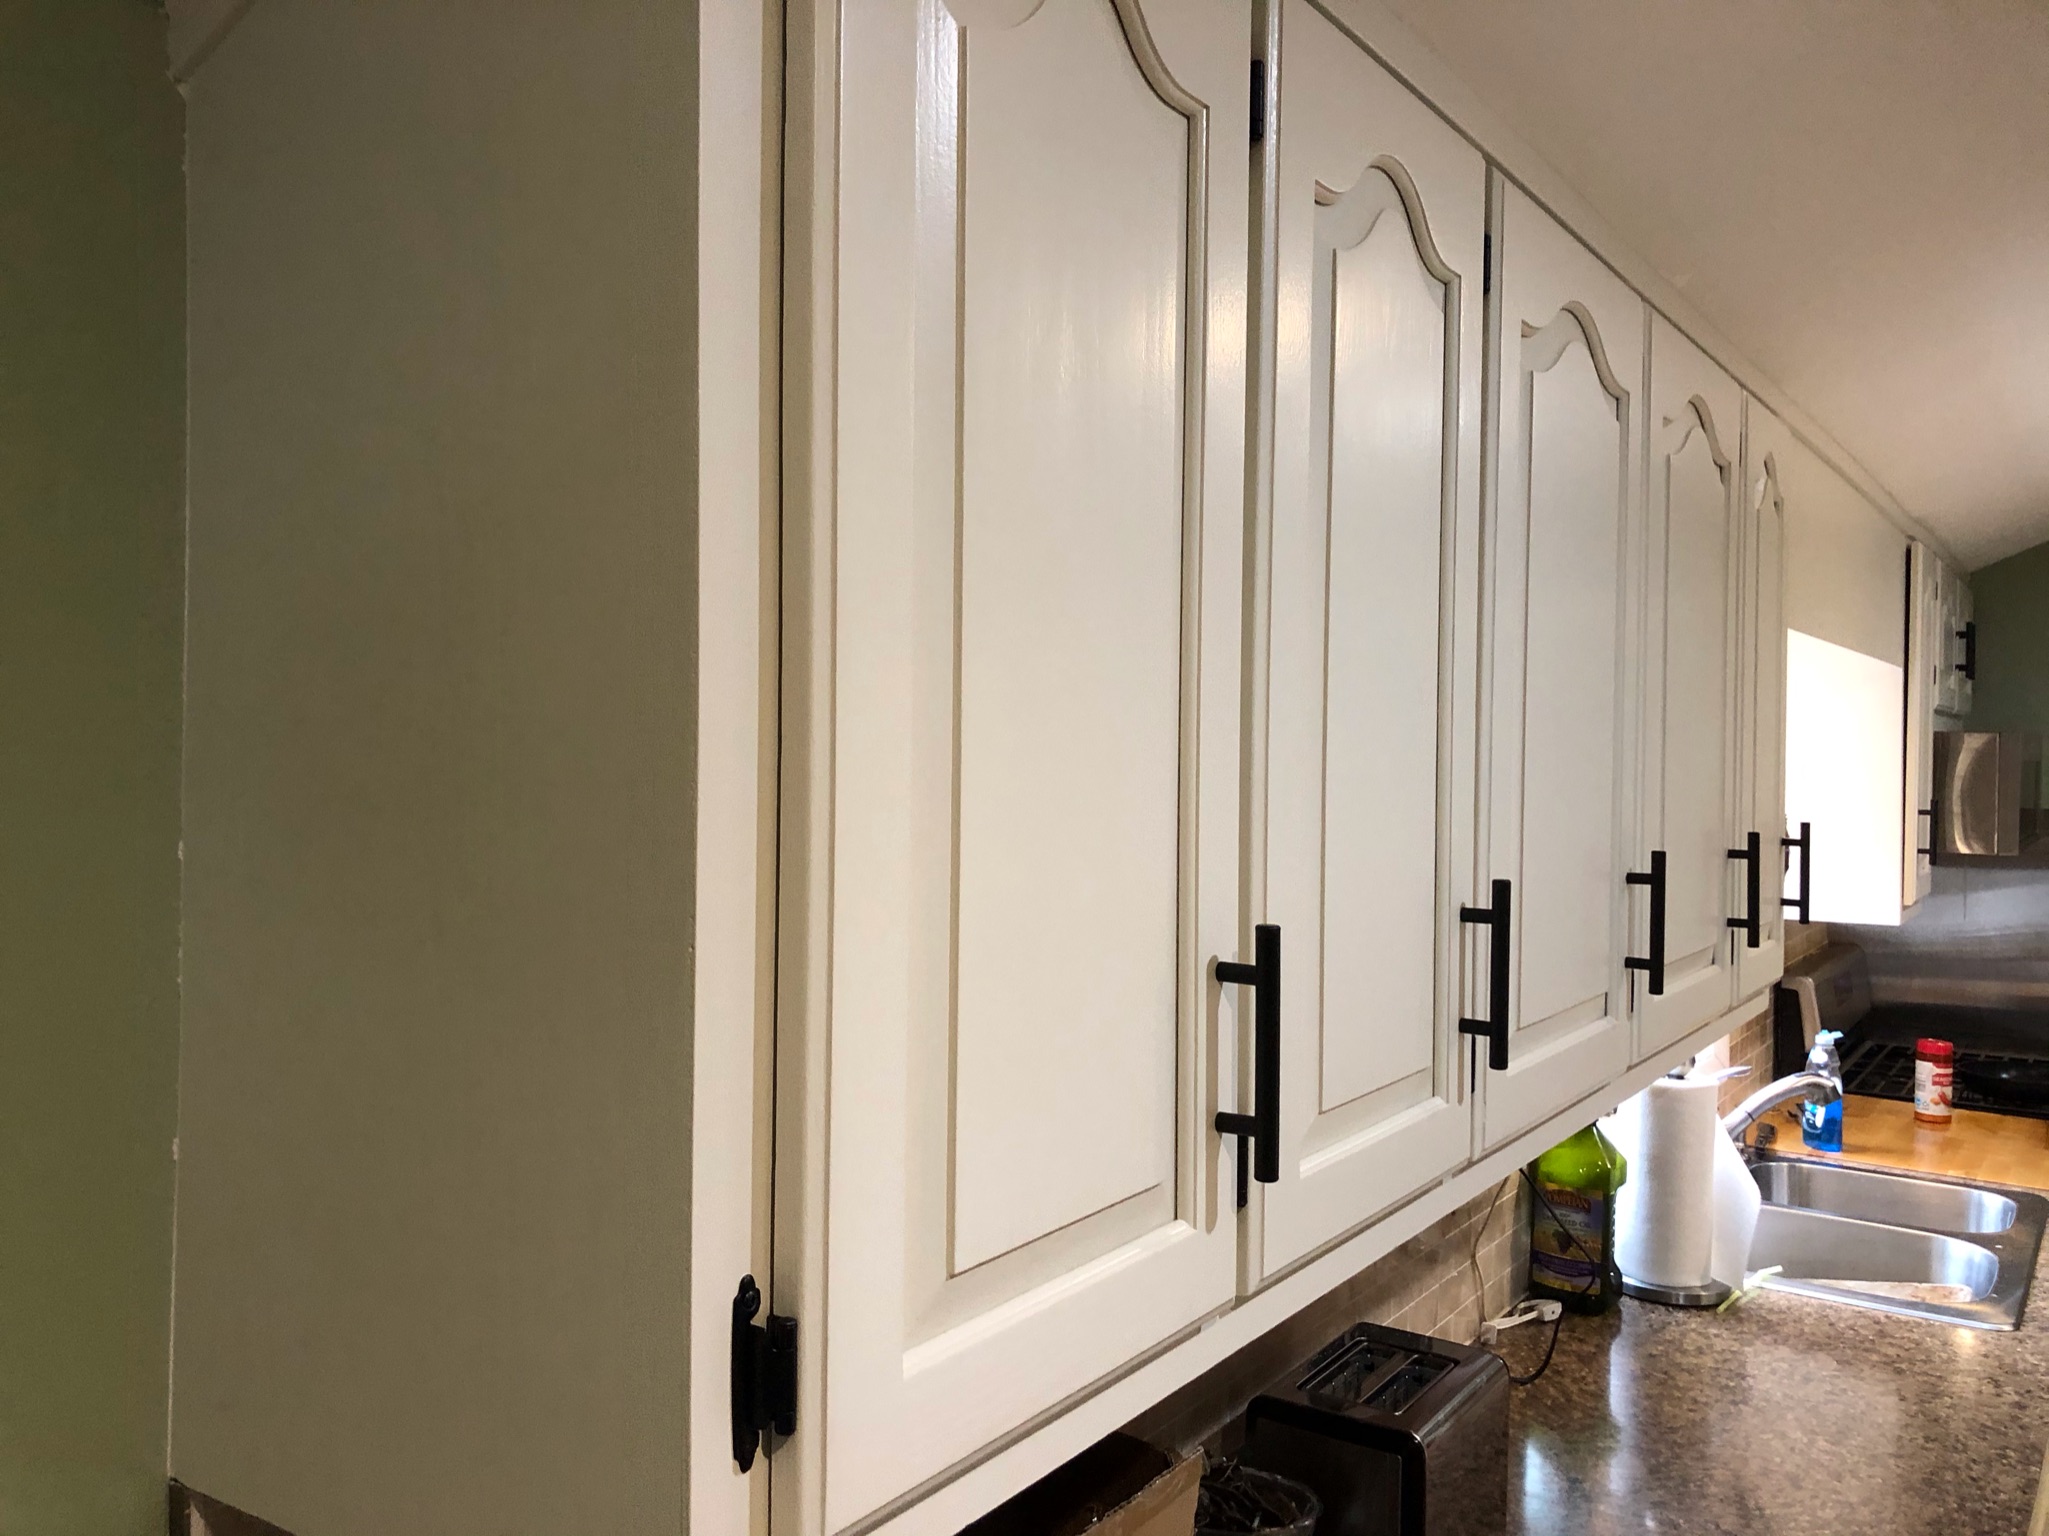 Painted oak cabinets, cabinet only